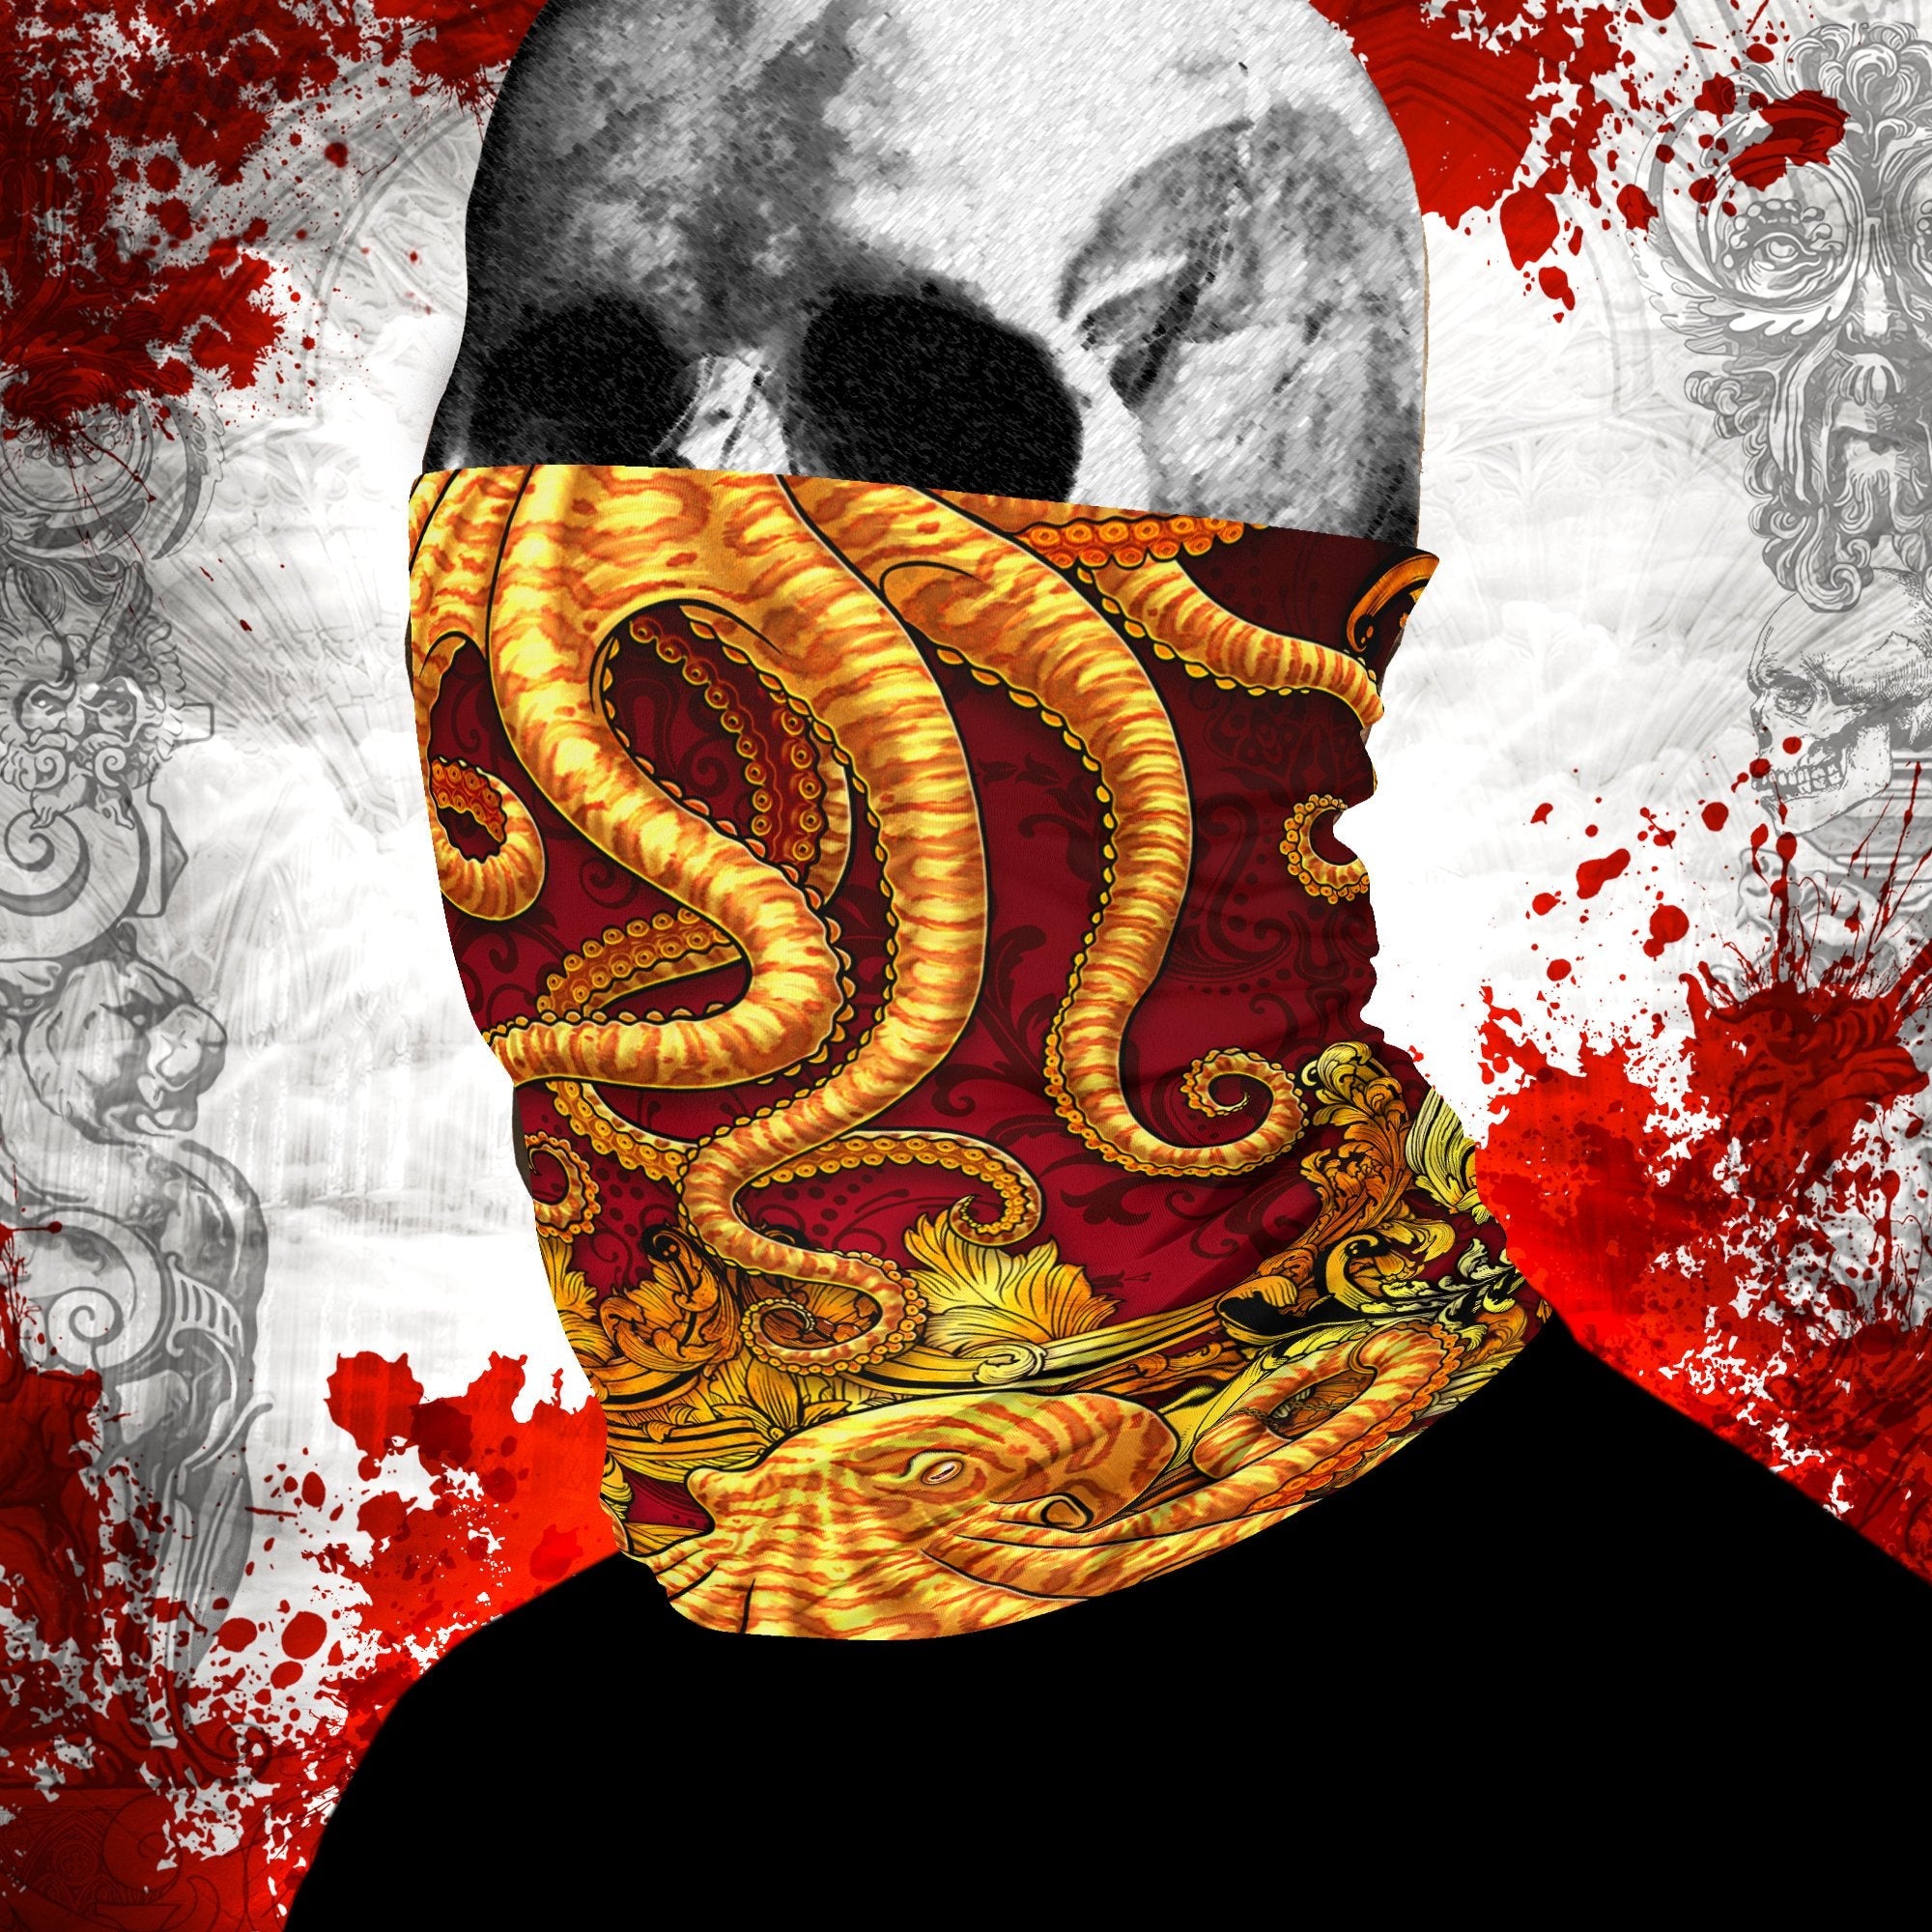 Tentacles Neck Gaiter, Face Mask, Head Covering, Octopus, Indie Outfit - Gold & Red - Abysm Internal